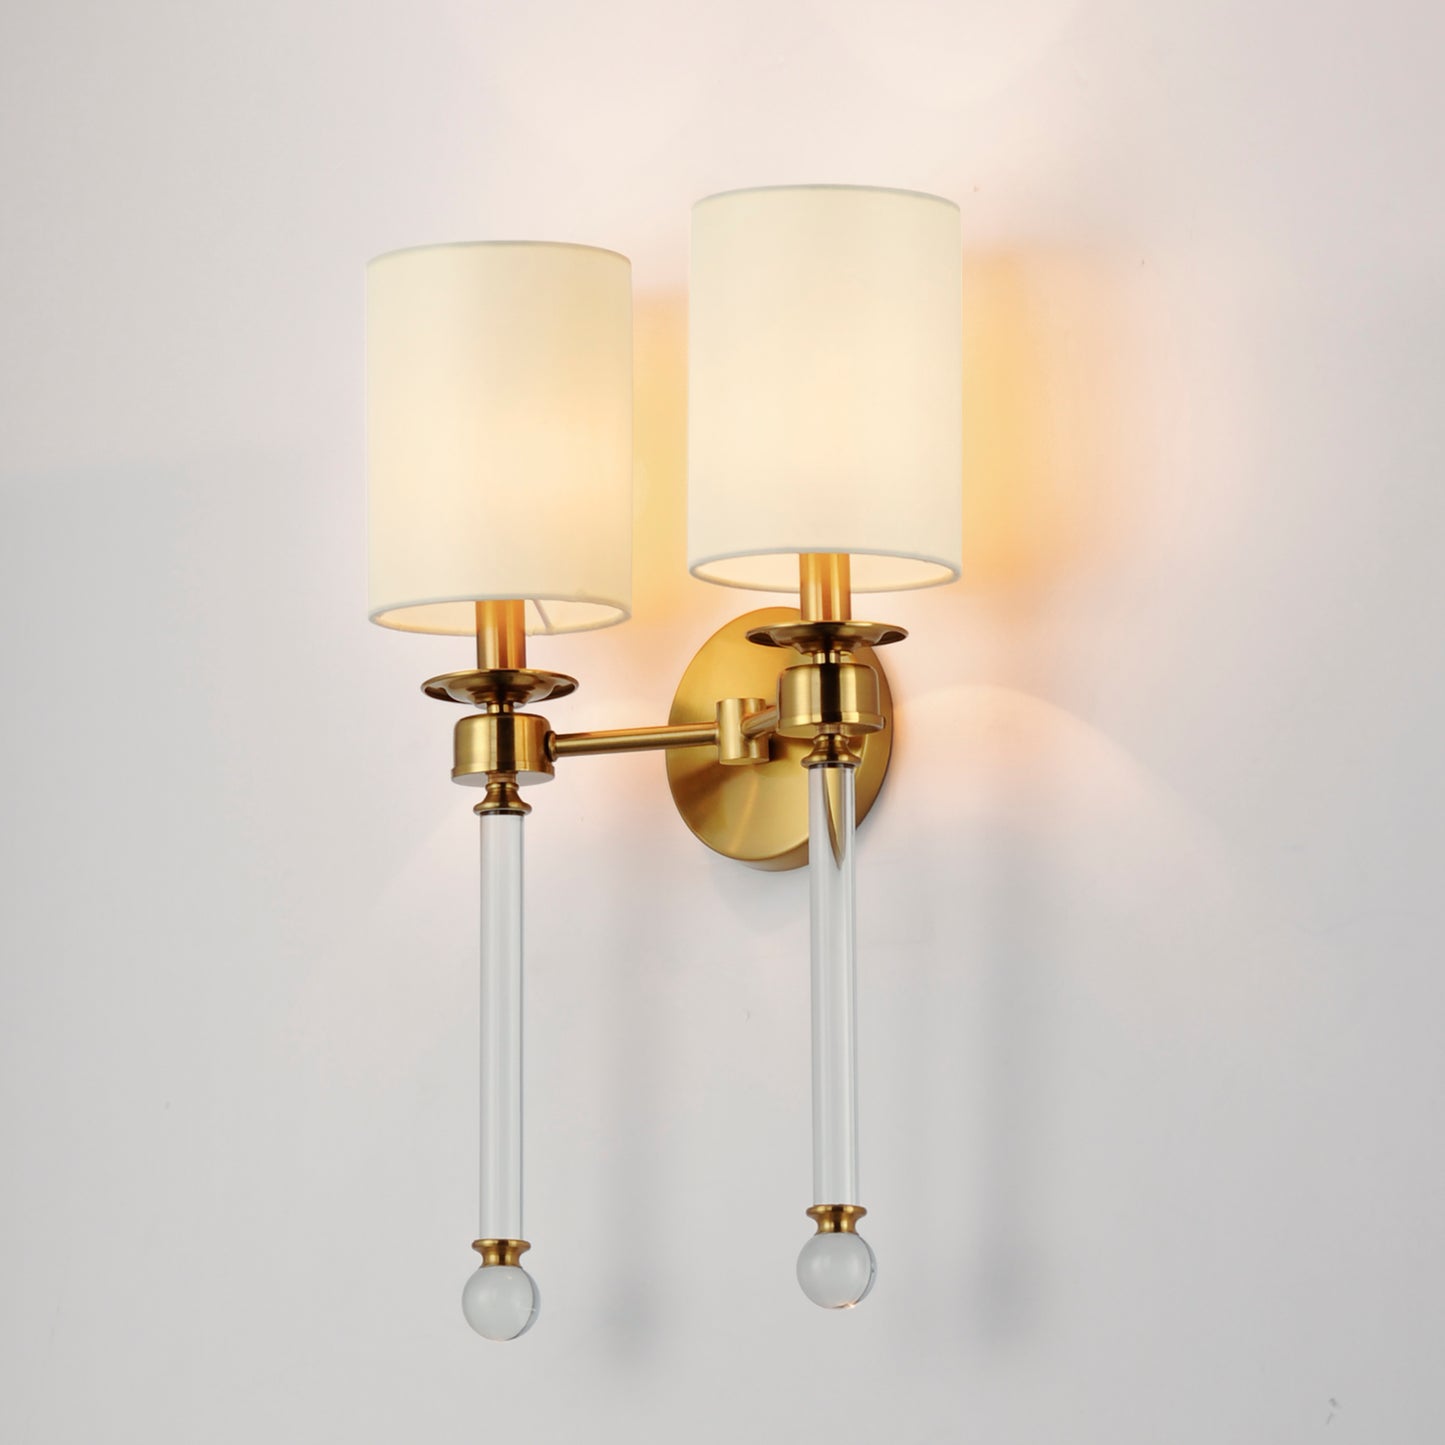 16108WTCLHR - 2 Light Lucent 14" Wall Sconce - Heritage Brass